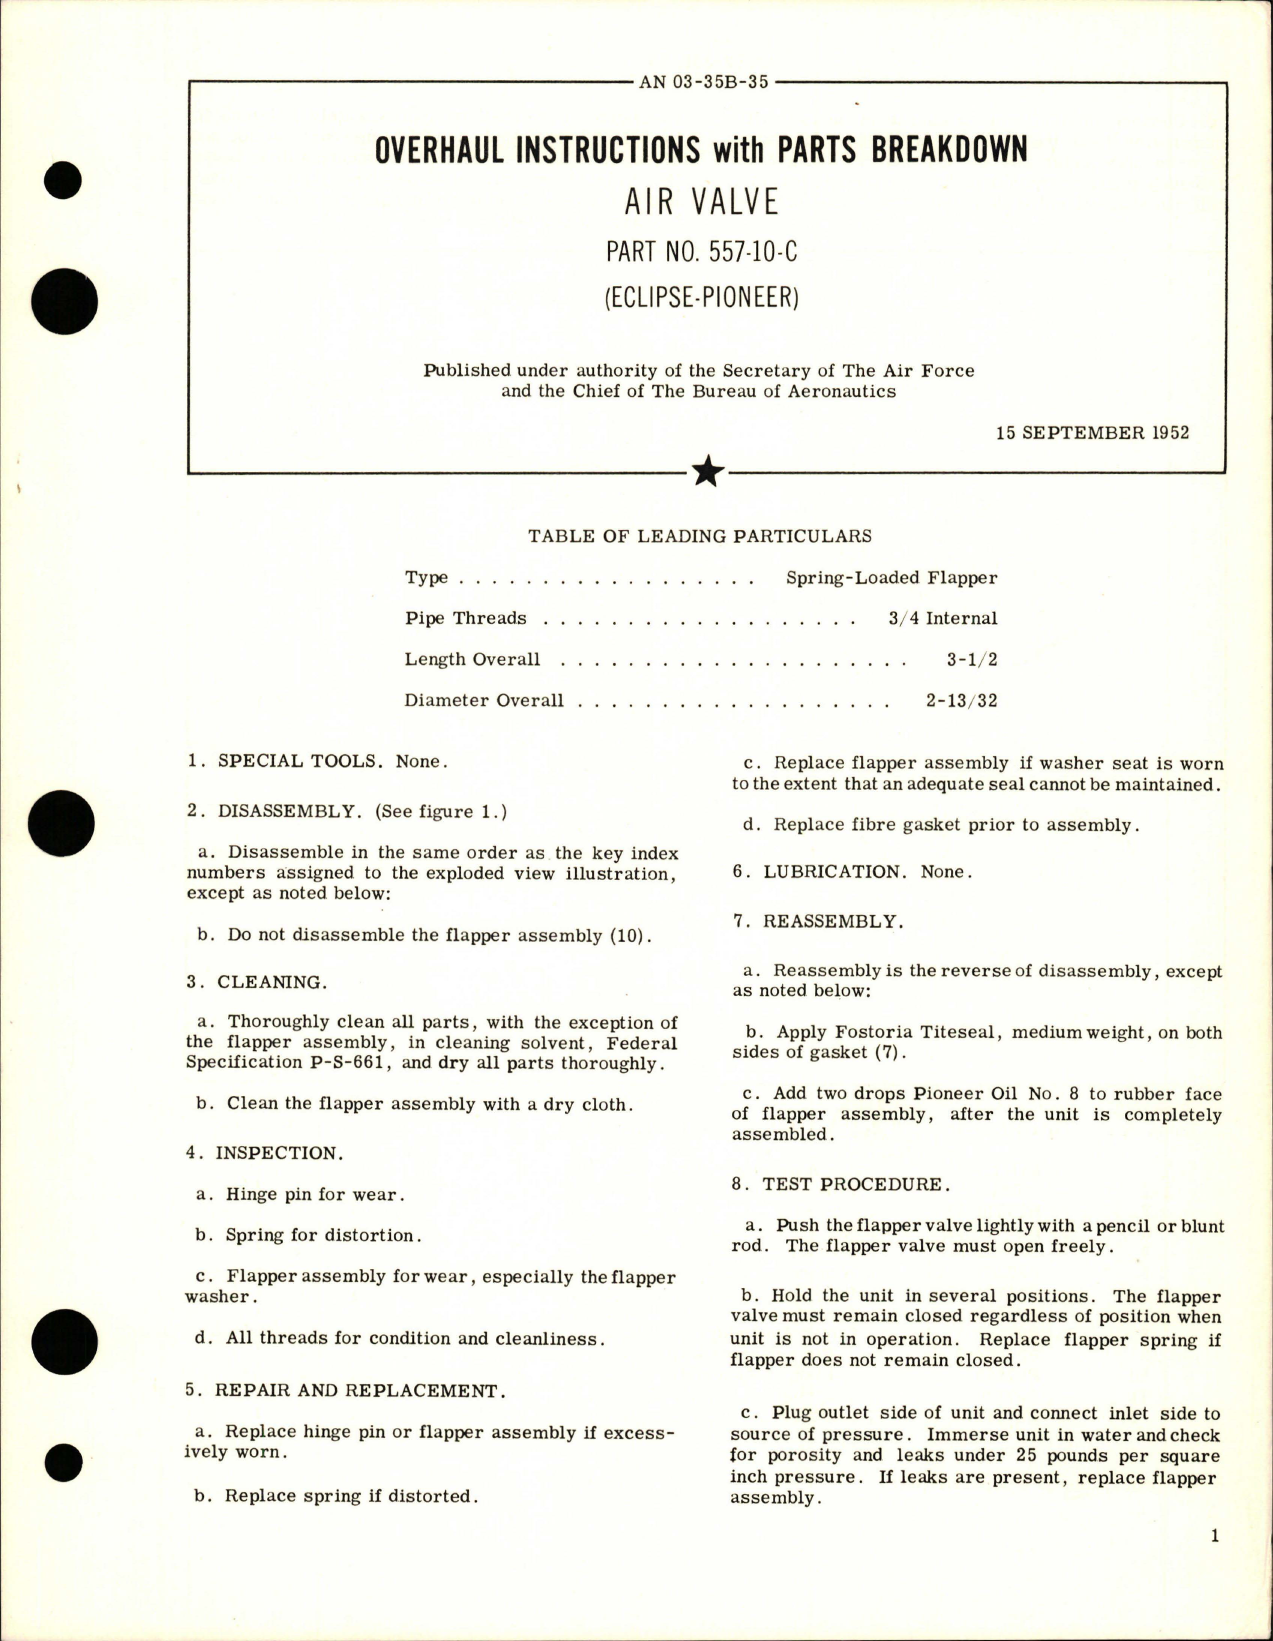 Sample page 1 from AirCorps Library document: Overhaul Instructions with Parts Breakdown for Air Valve - Part 557-10-C 